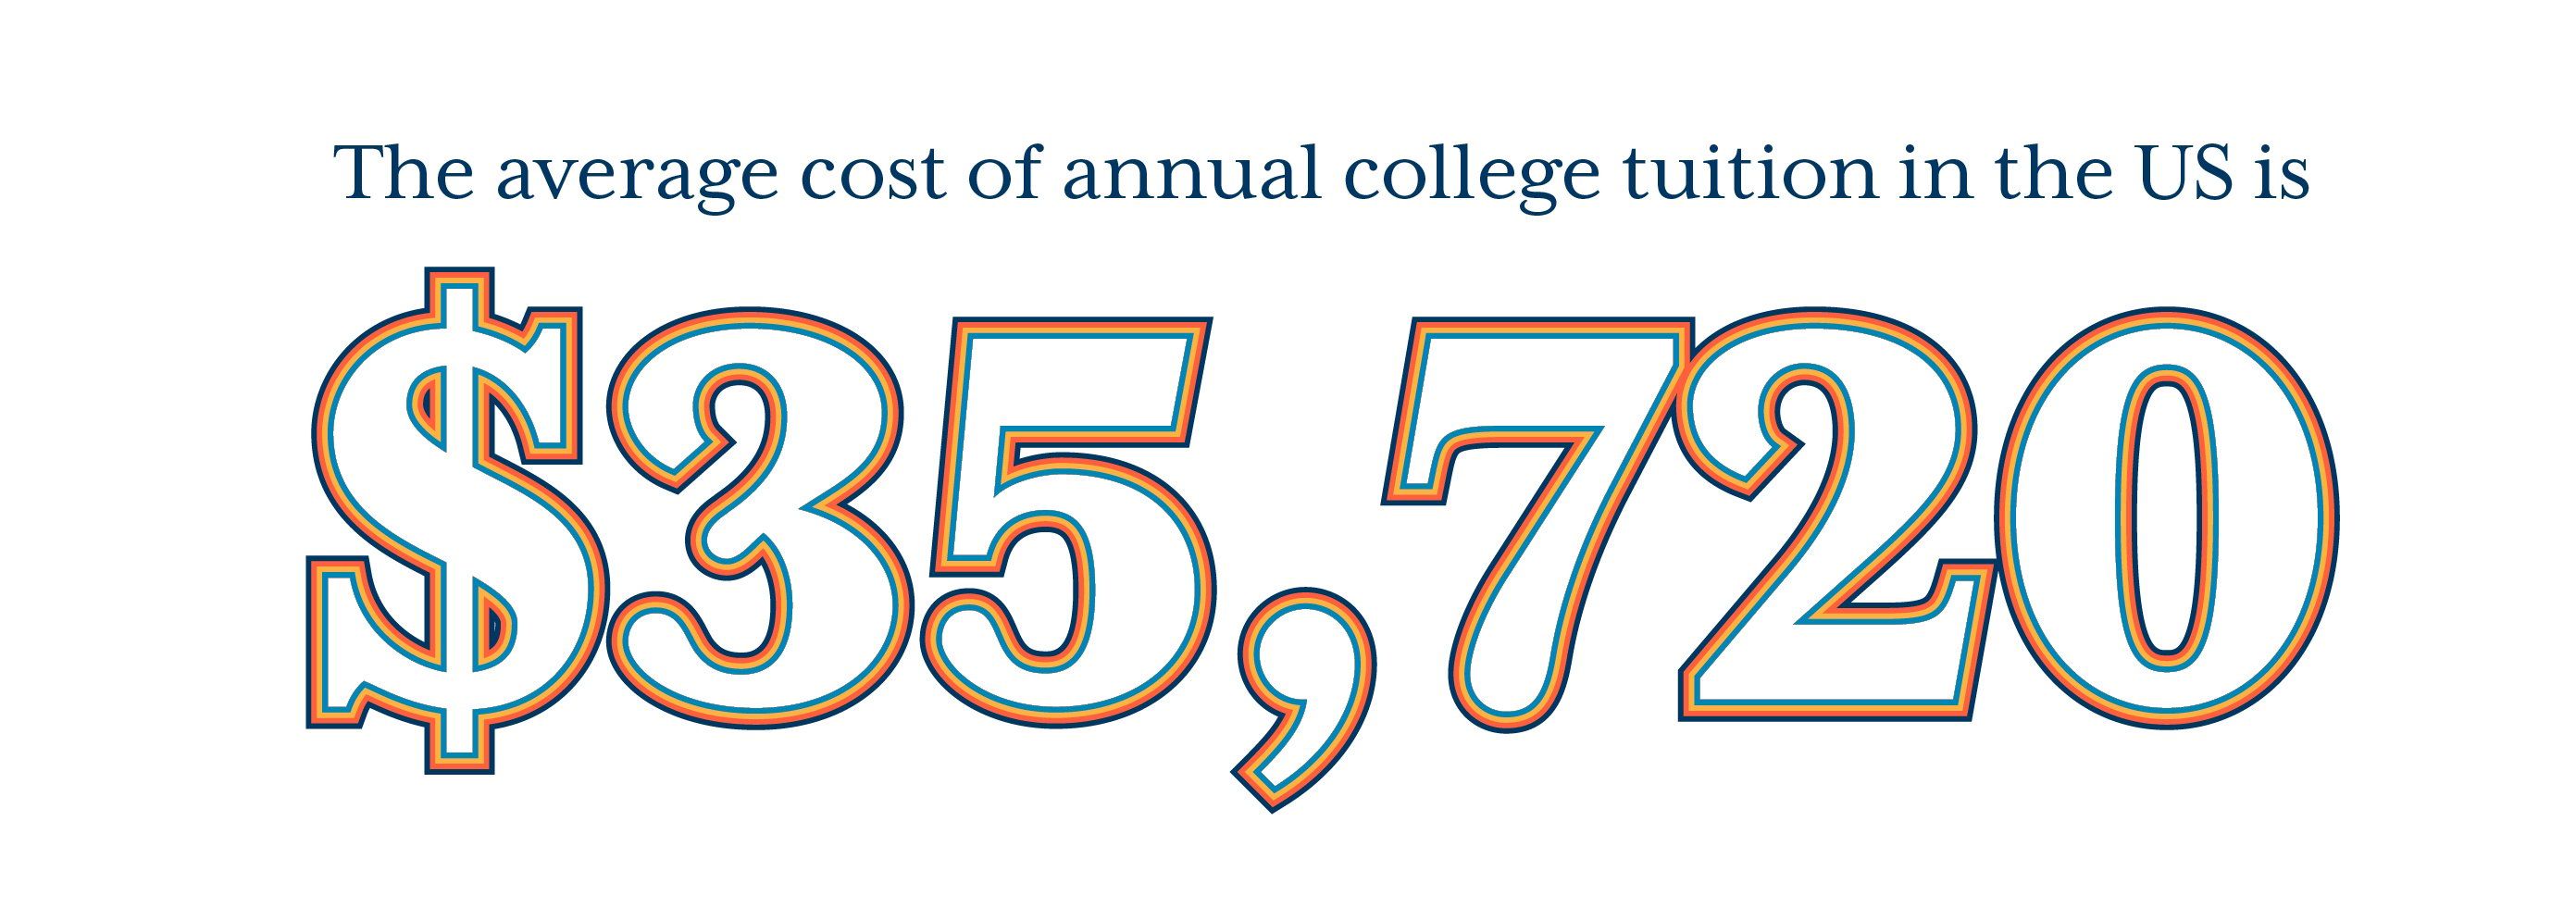 Average cost of tuition 35,000 dollars